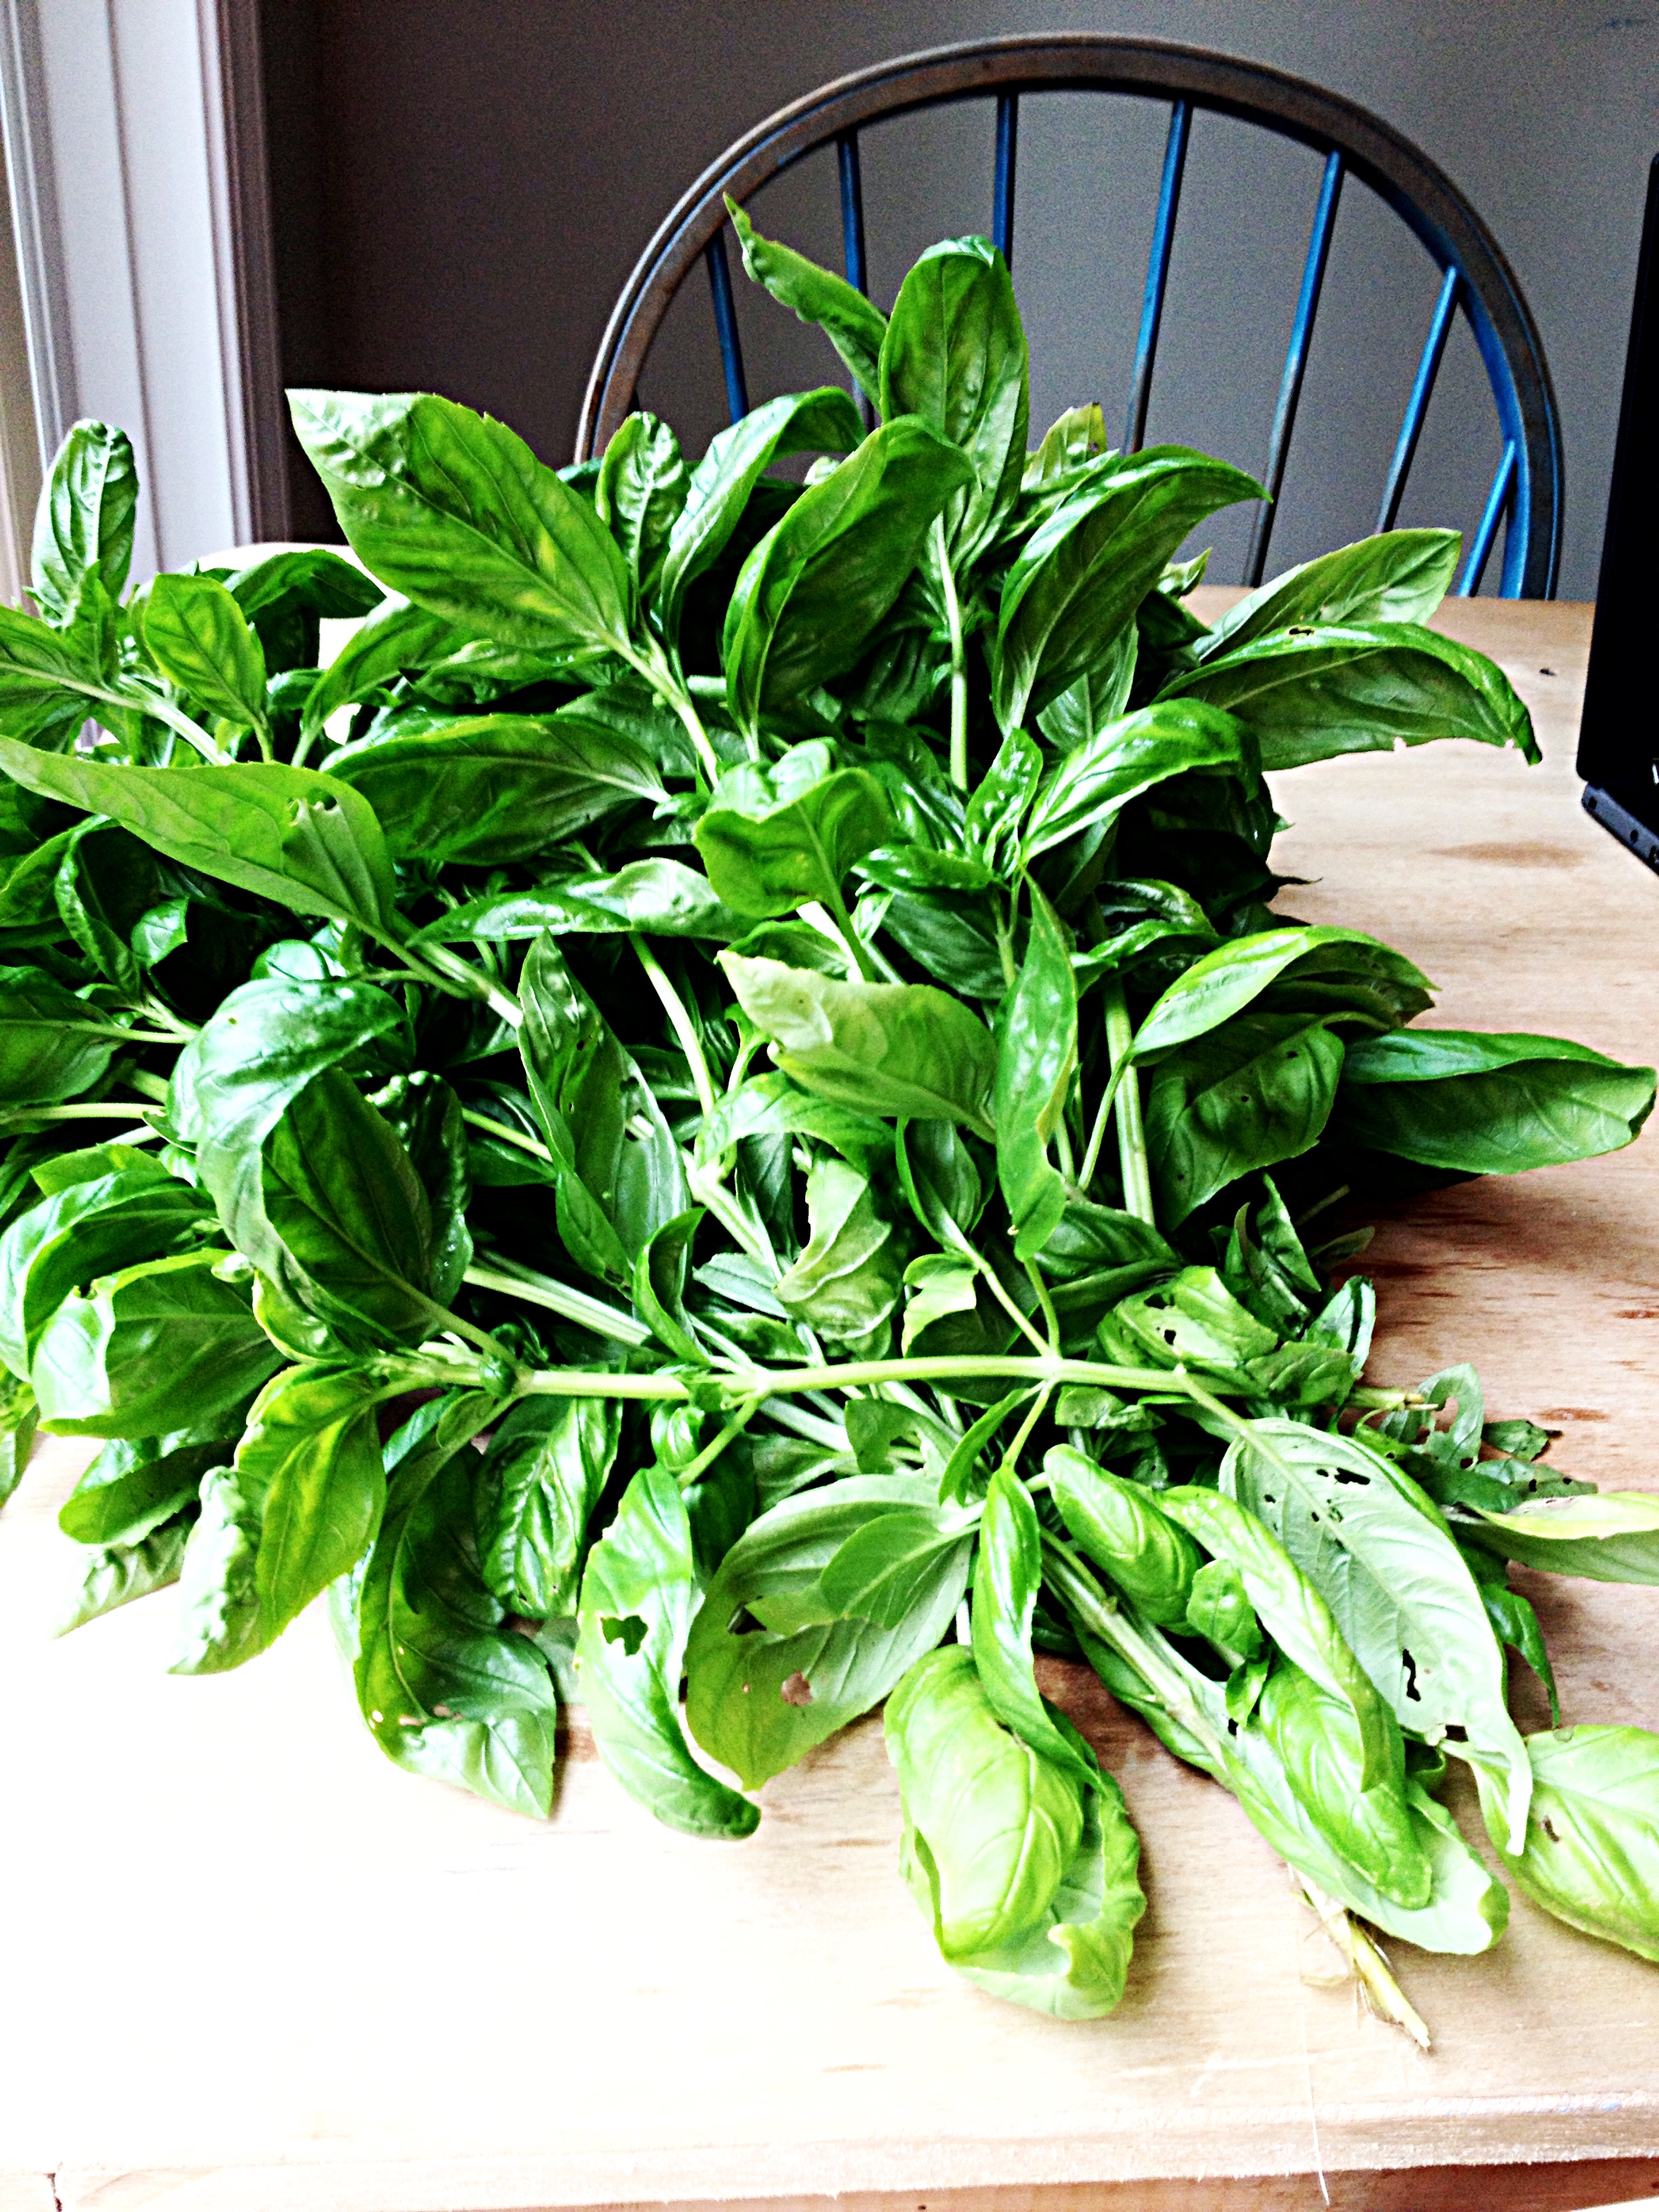 basil leaves covering the table